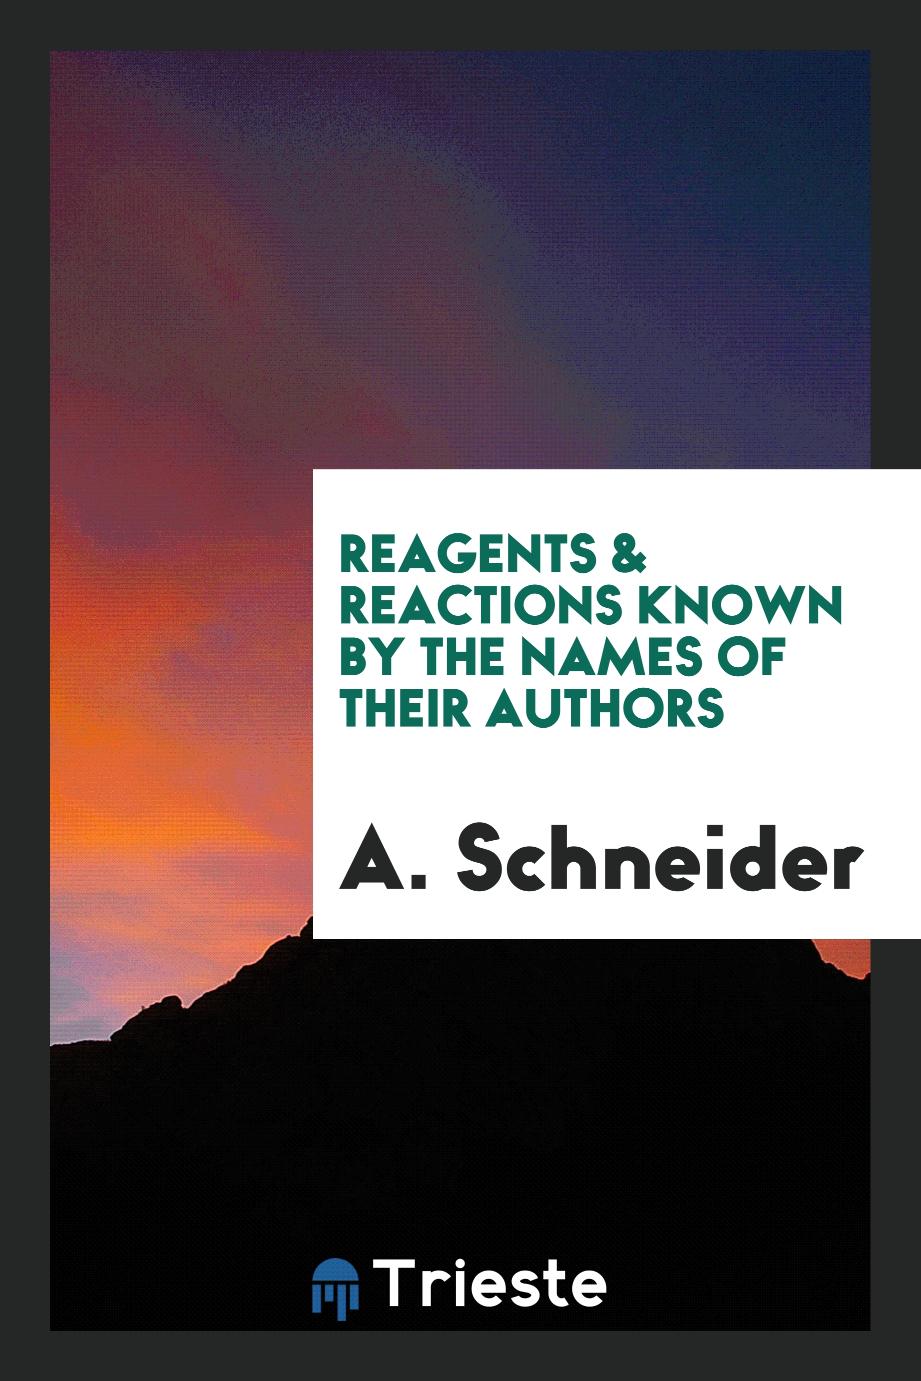 Reagents & Reactions Known by the Names of Their Authors